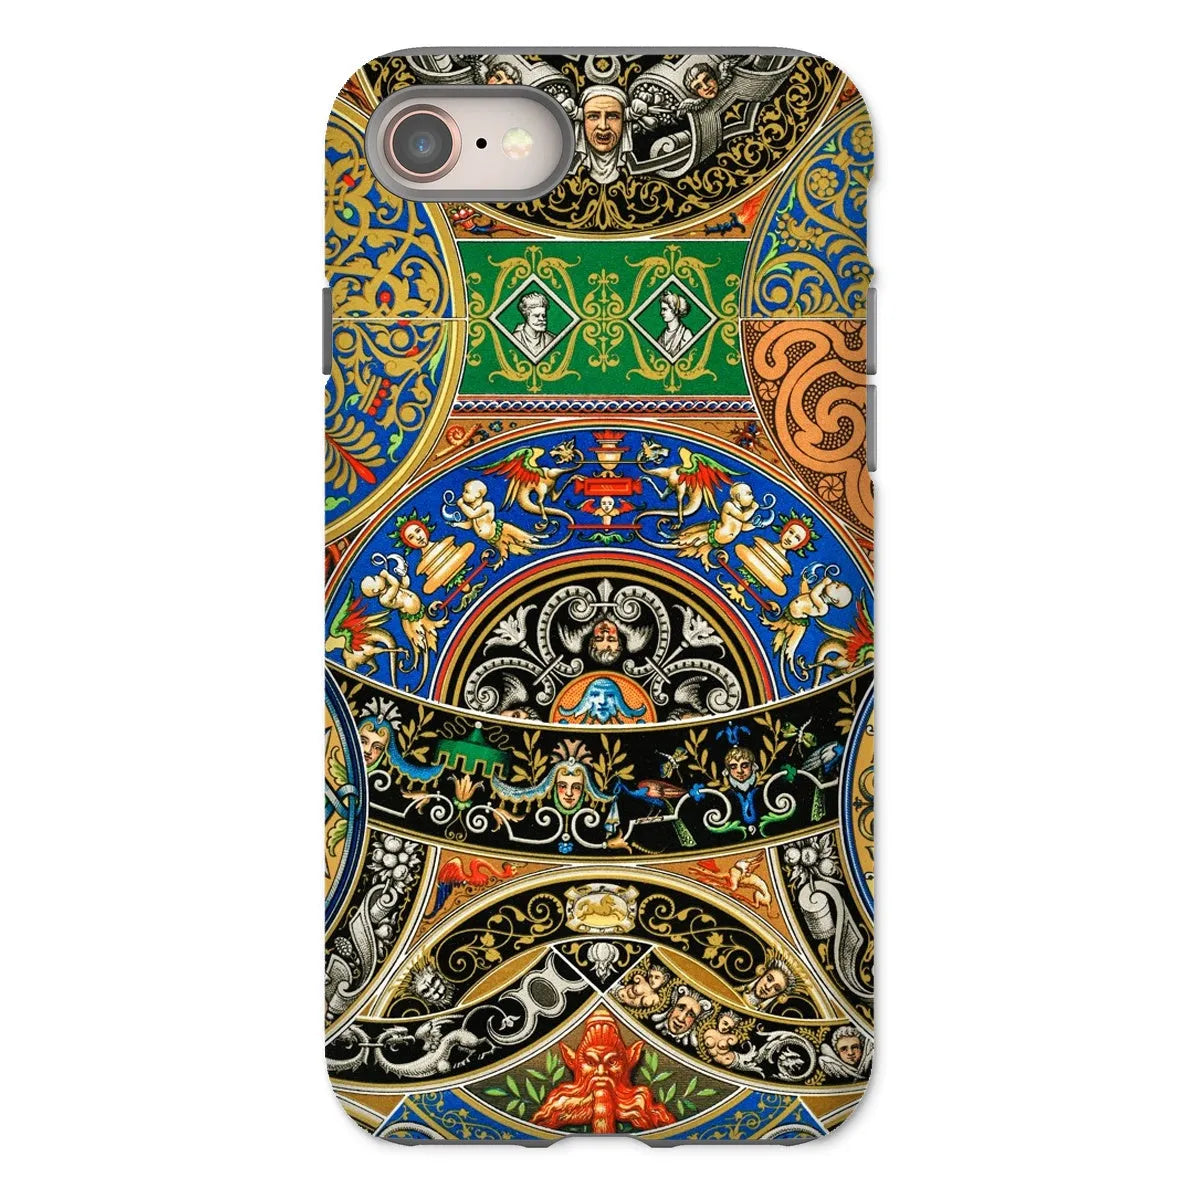 Renaissance Pattern 2 By Auguste Racinet Tough Phone Case - Iphone 8 / Gloss - Mobile Phone Cases - Aesthetic Art